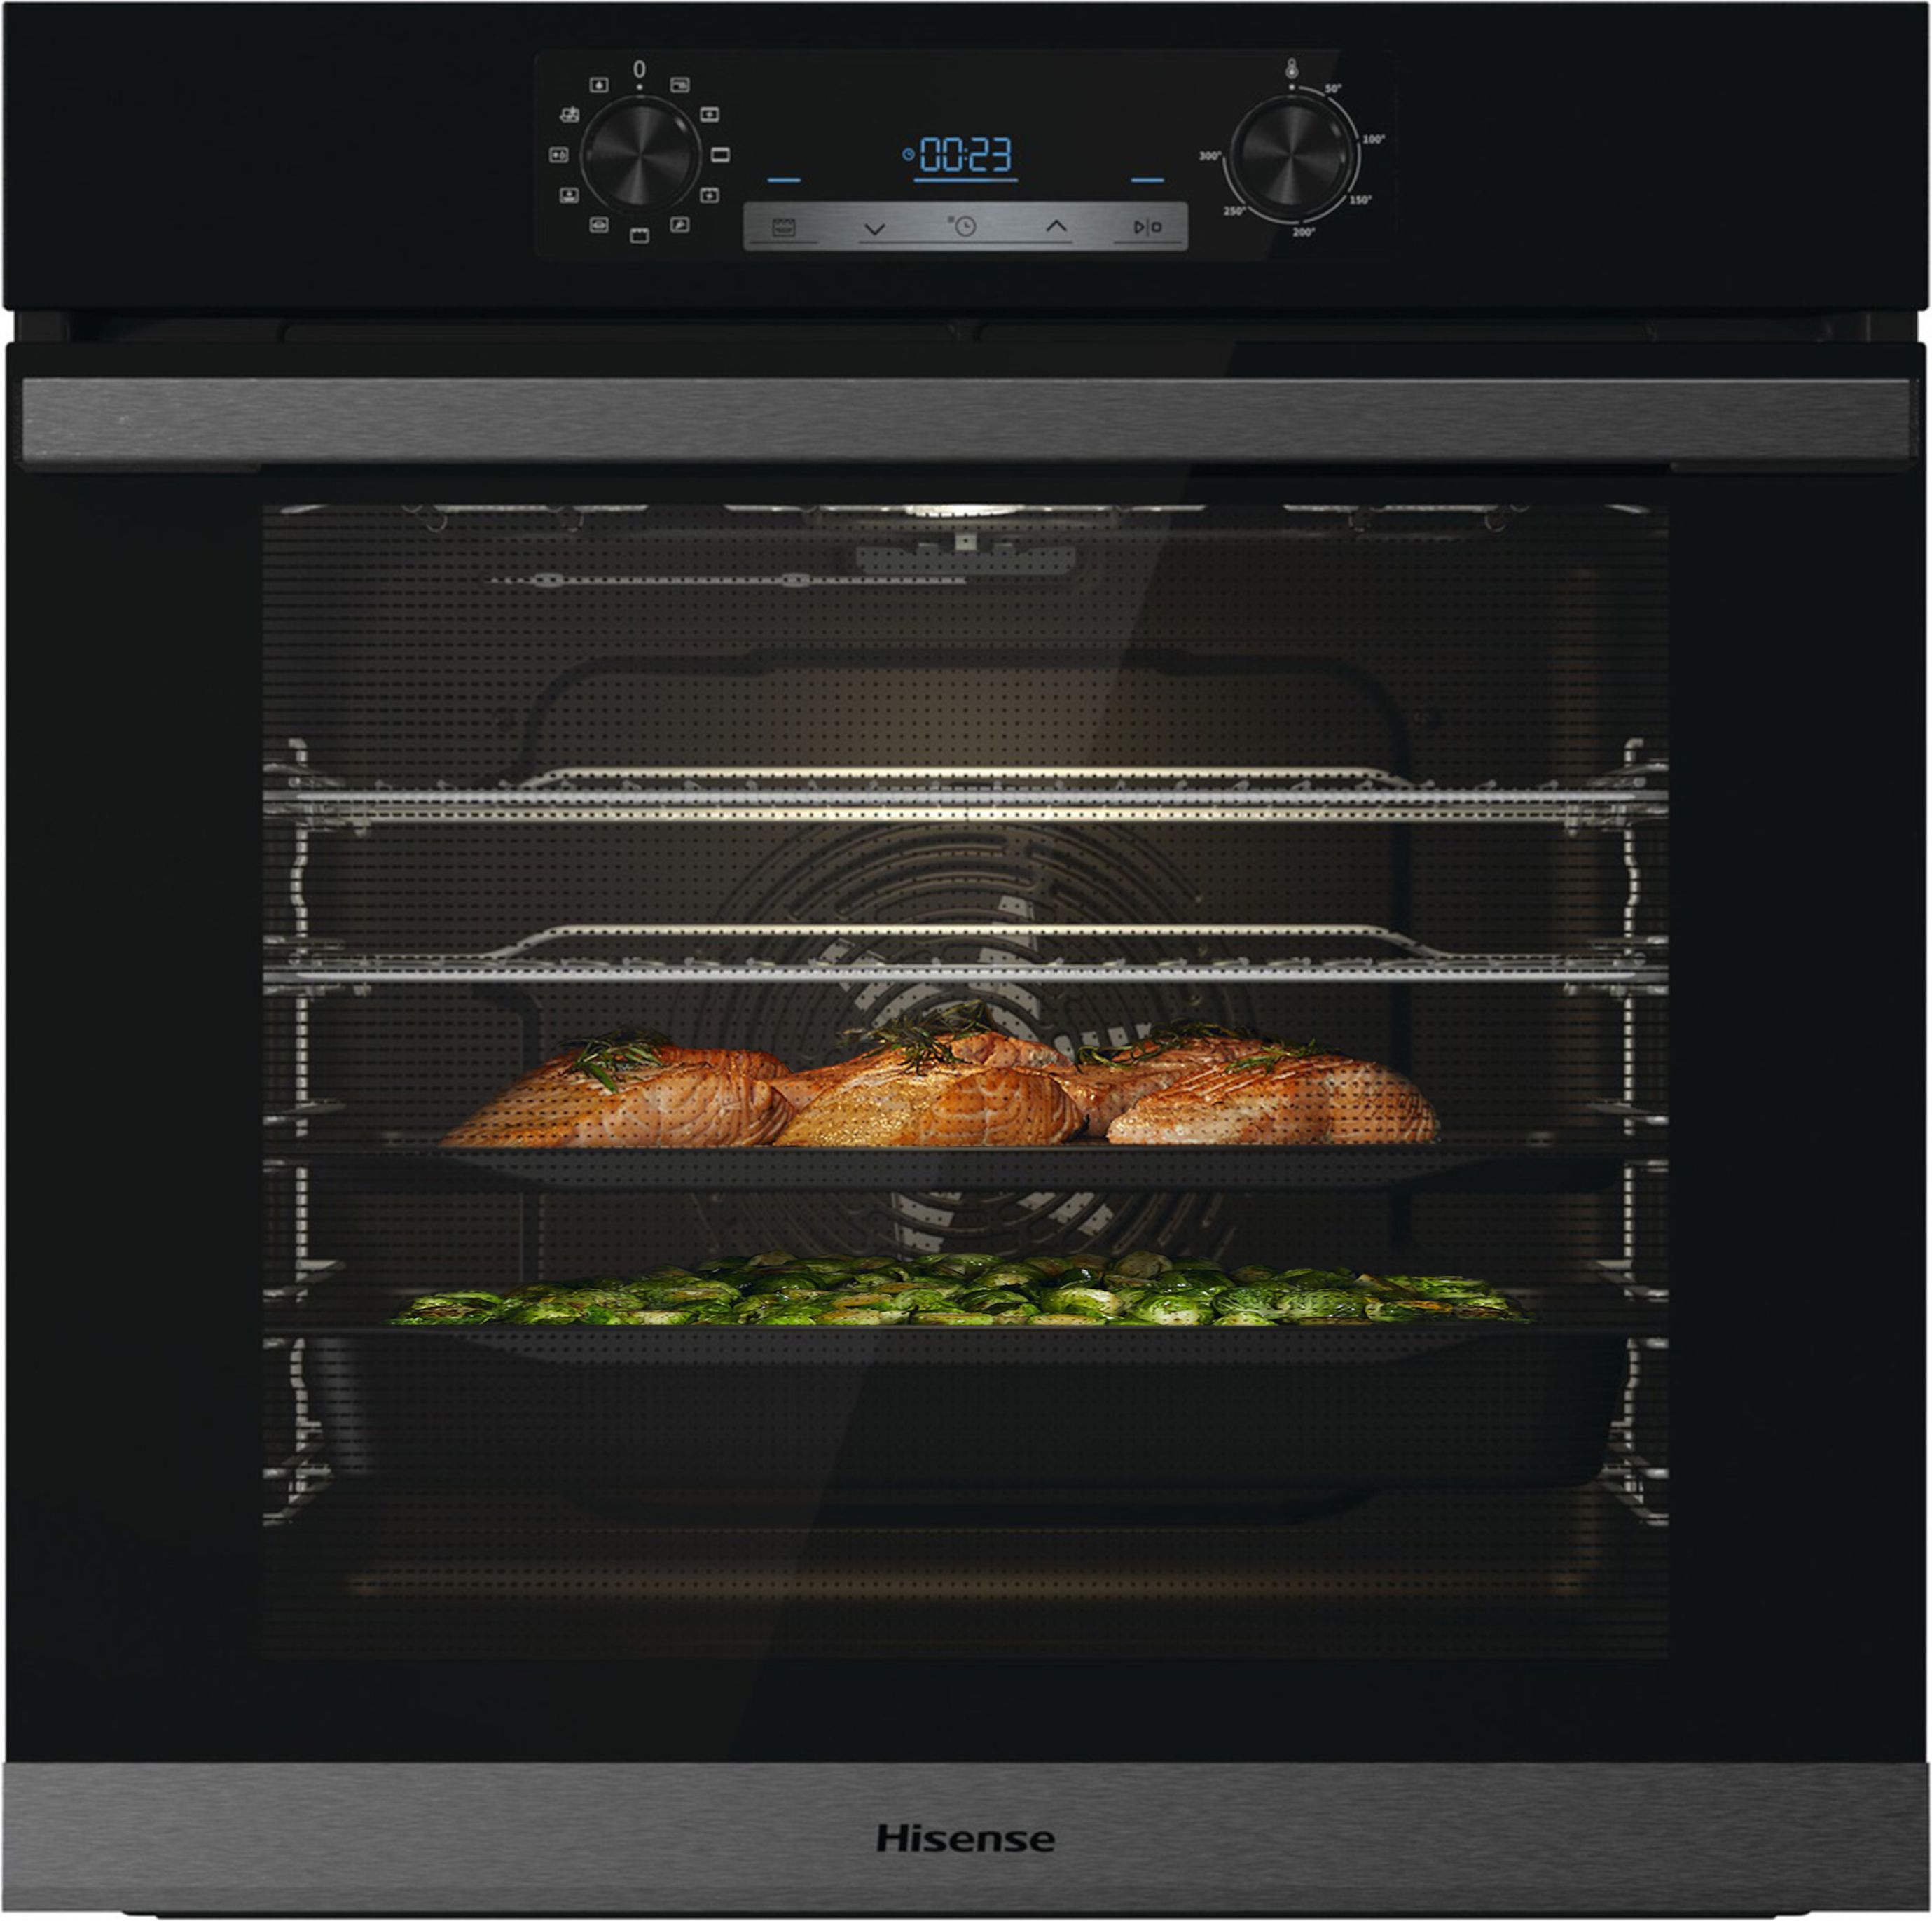 Hisense BSA63222ABUK Built In Electric Single Oven - Black - A Rated, Black